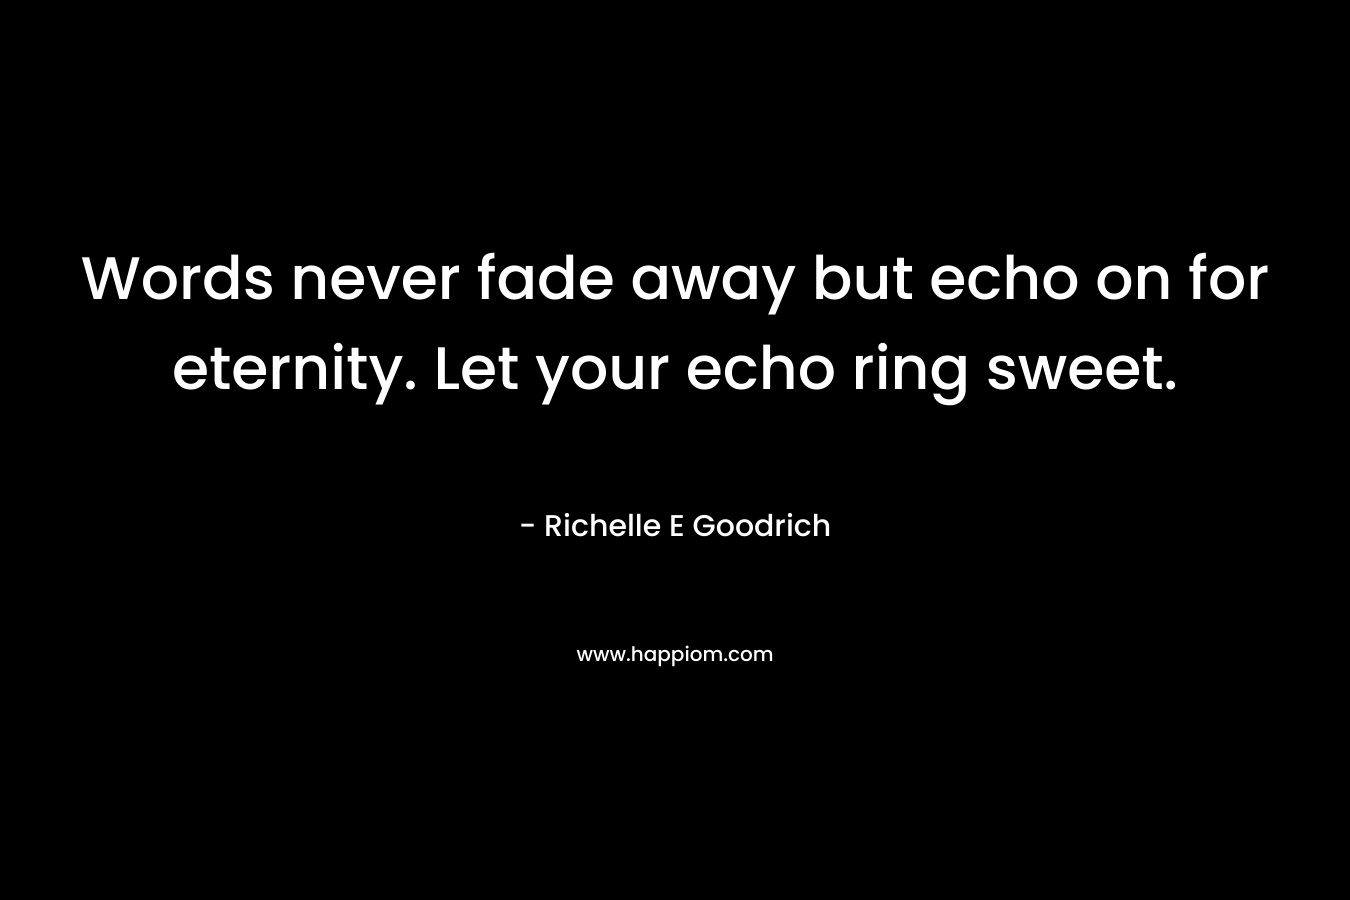 Words never fade away but echo on for eternity. Let your echo ring sweet.